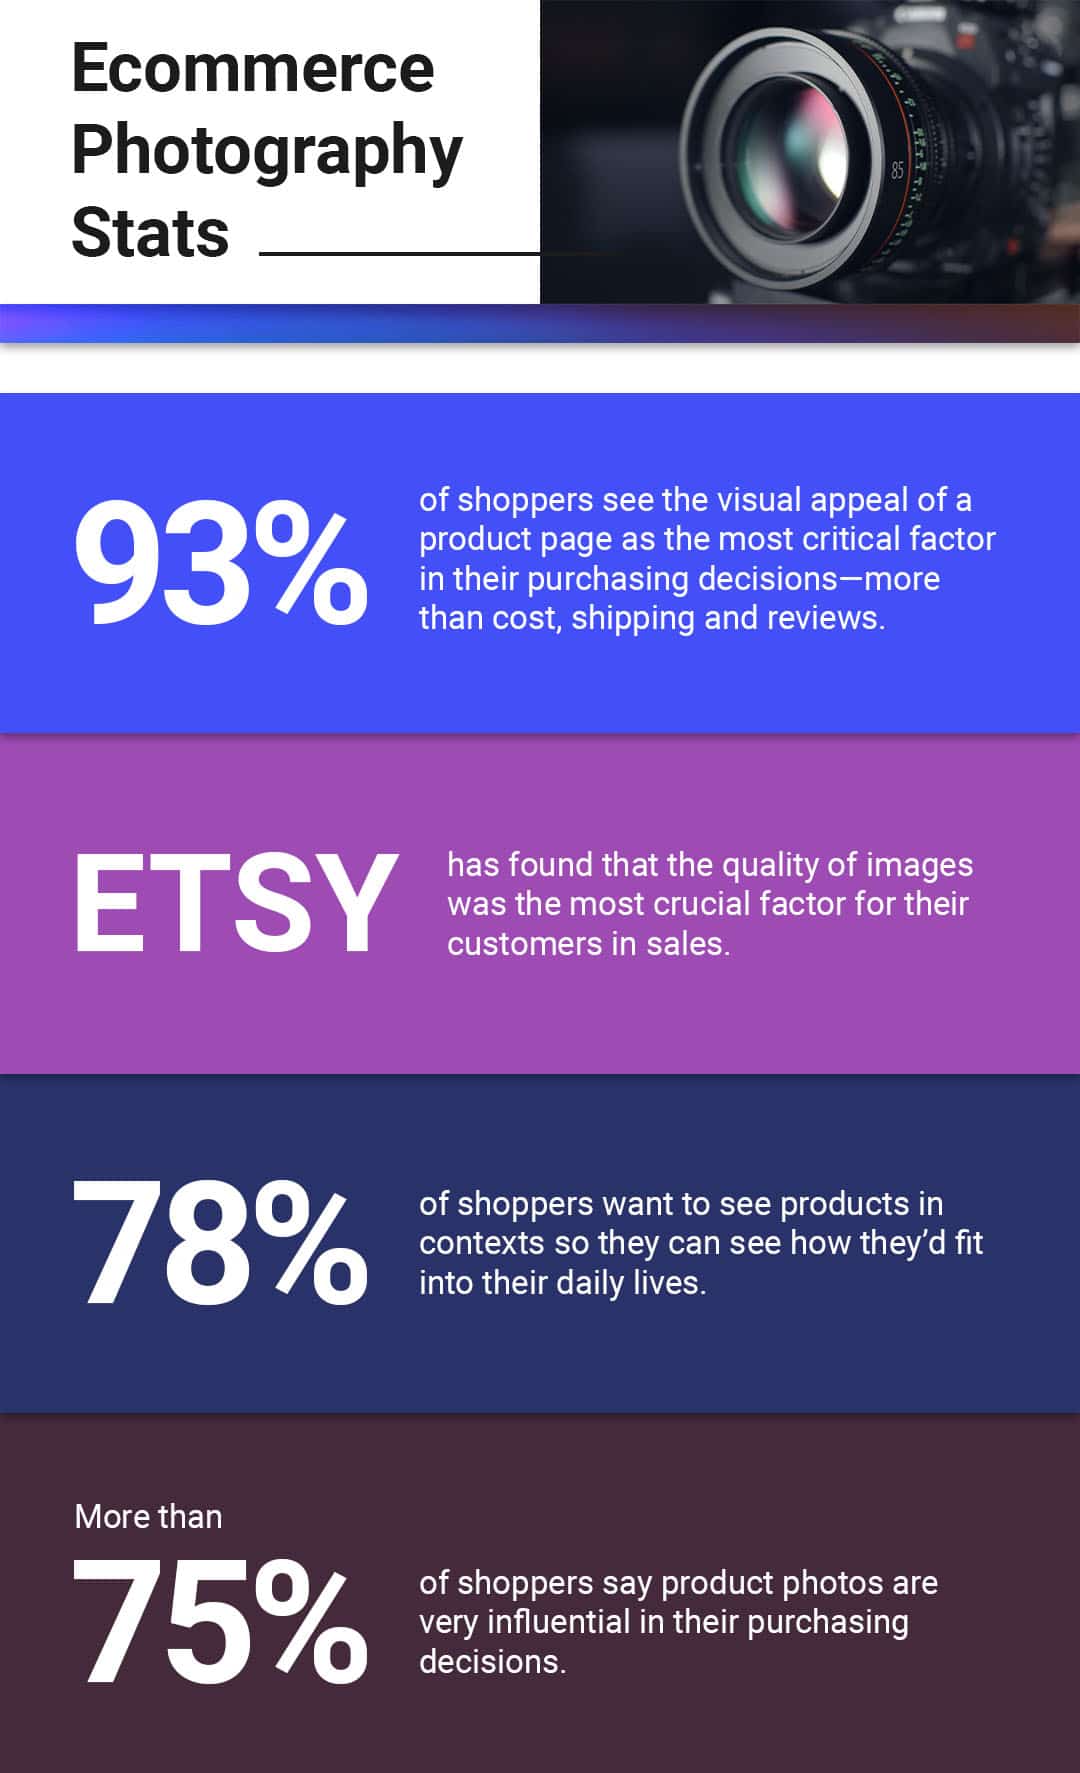 Ecommerce Photography Stats